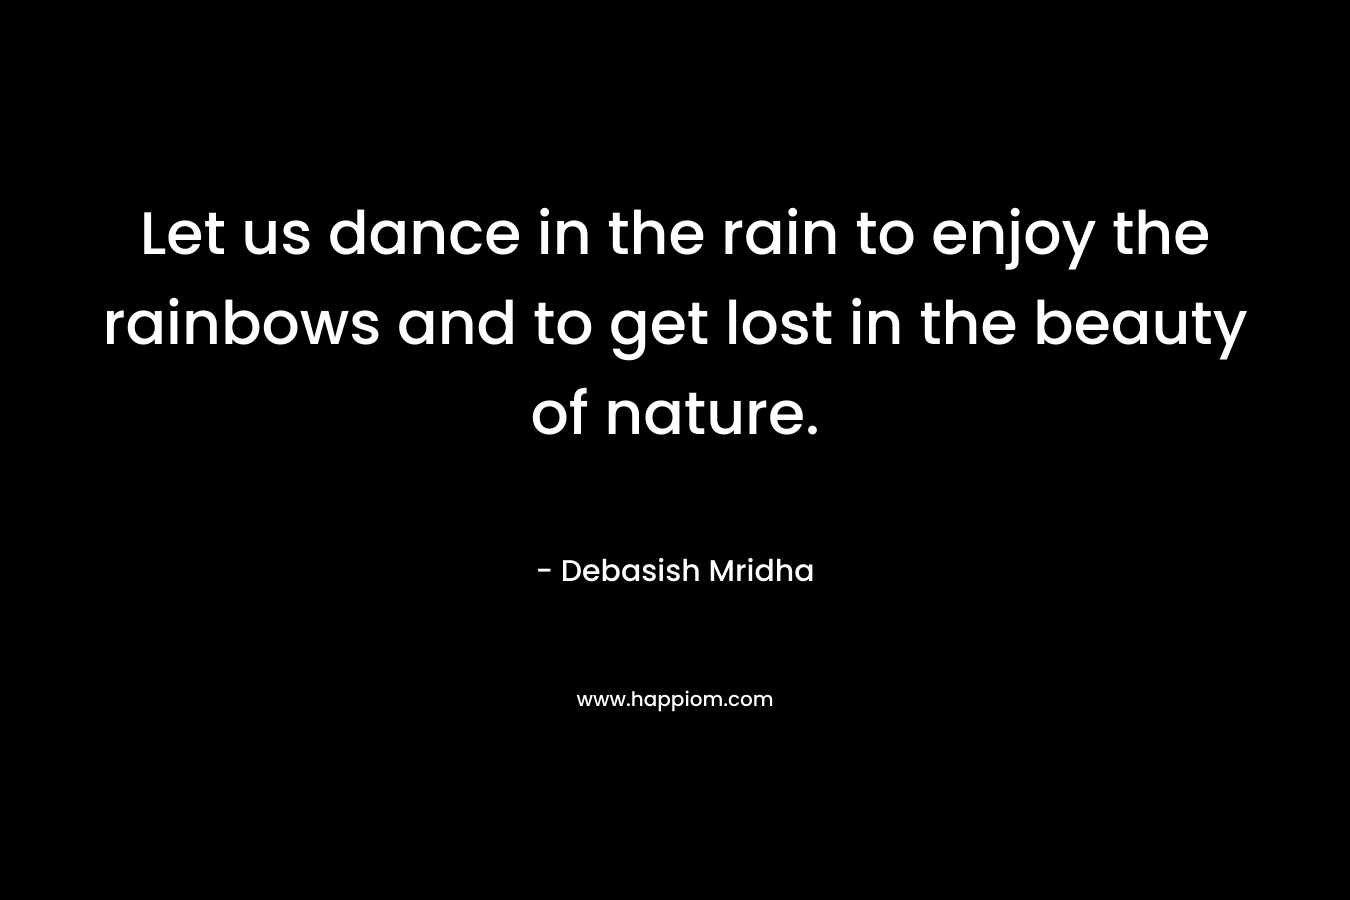 Let us dance in the rain to enjoy the rainbows and to get lost in the beauty of nature.